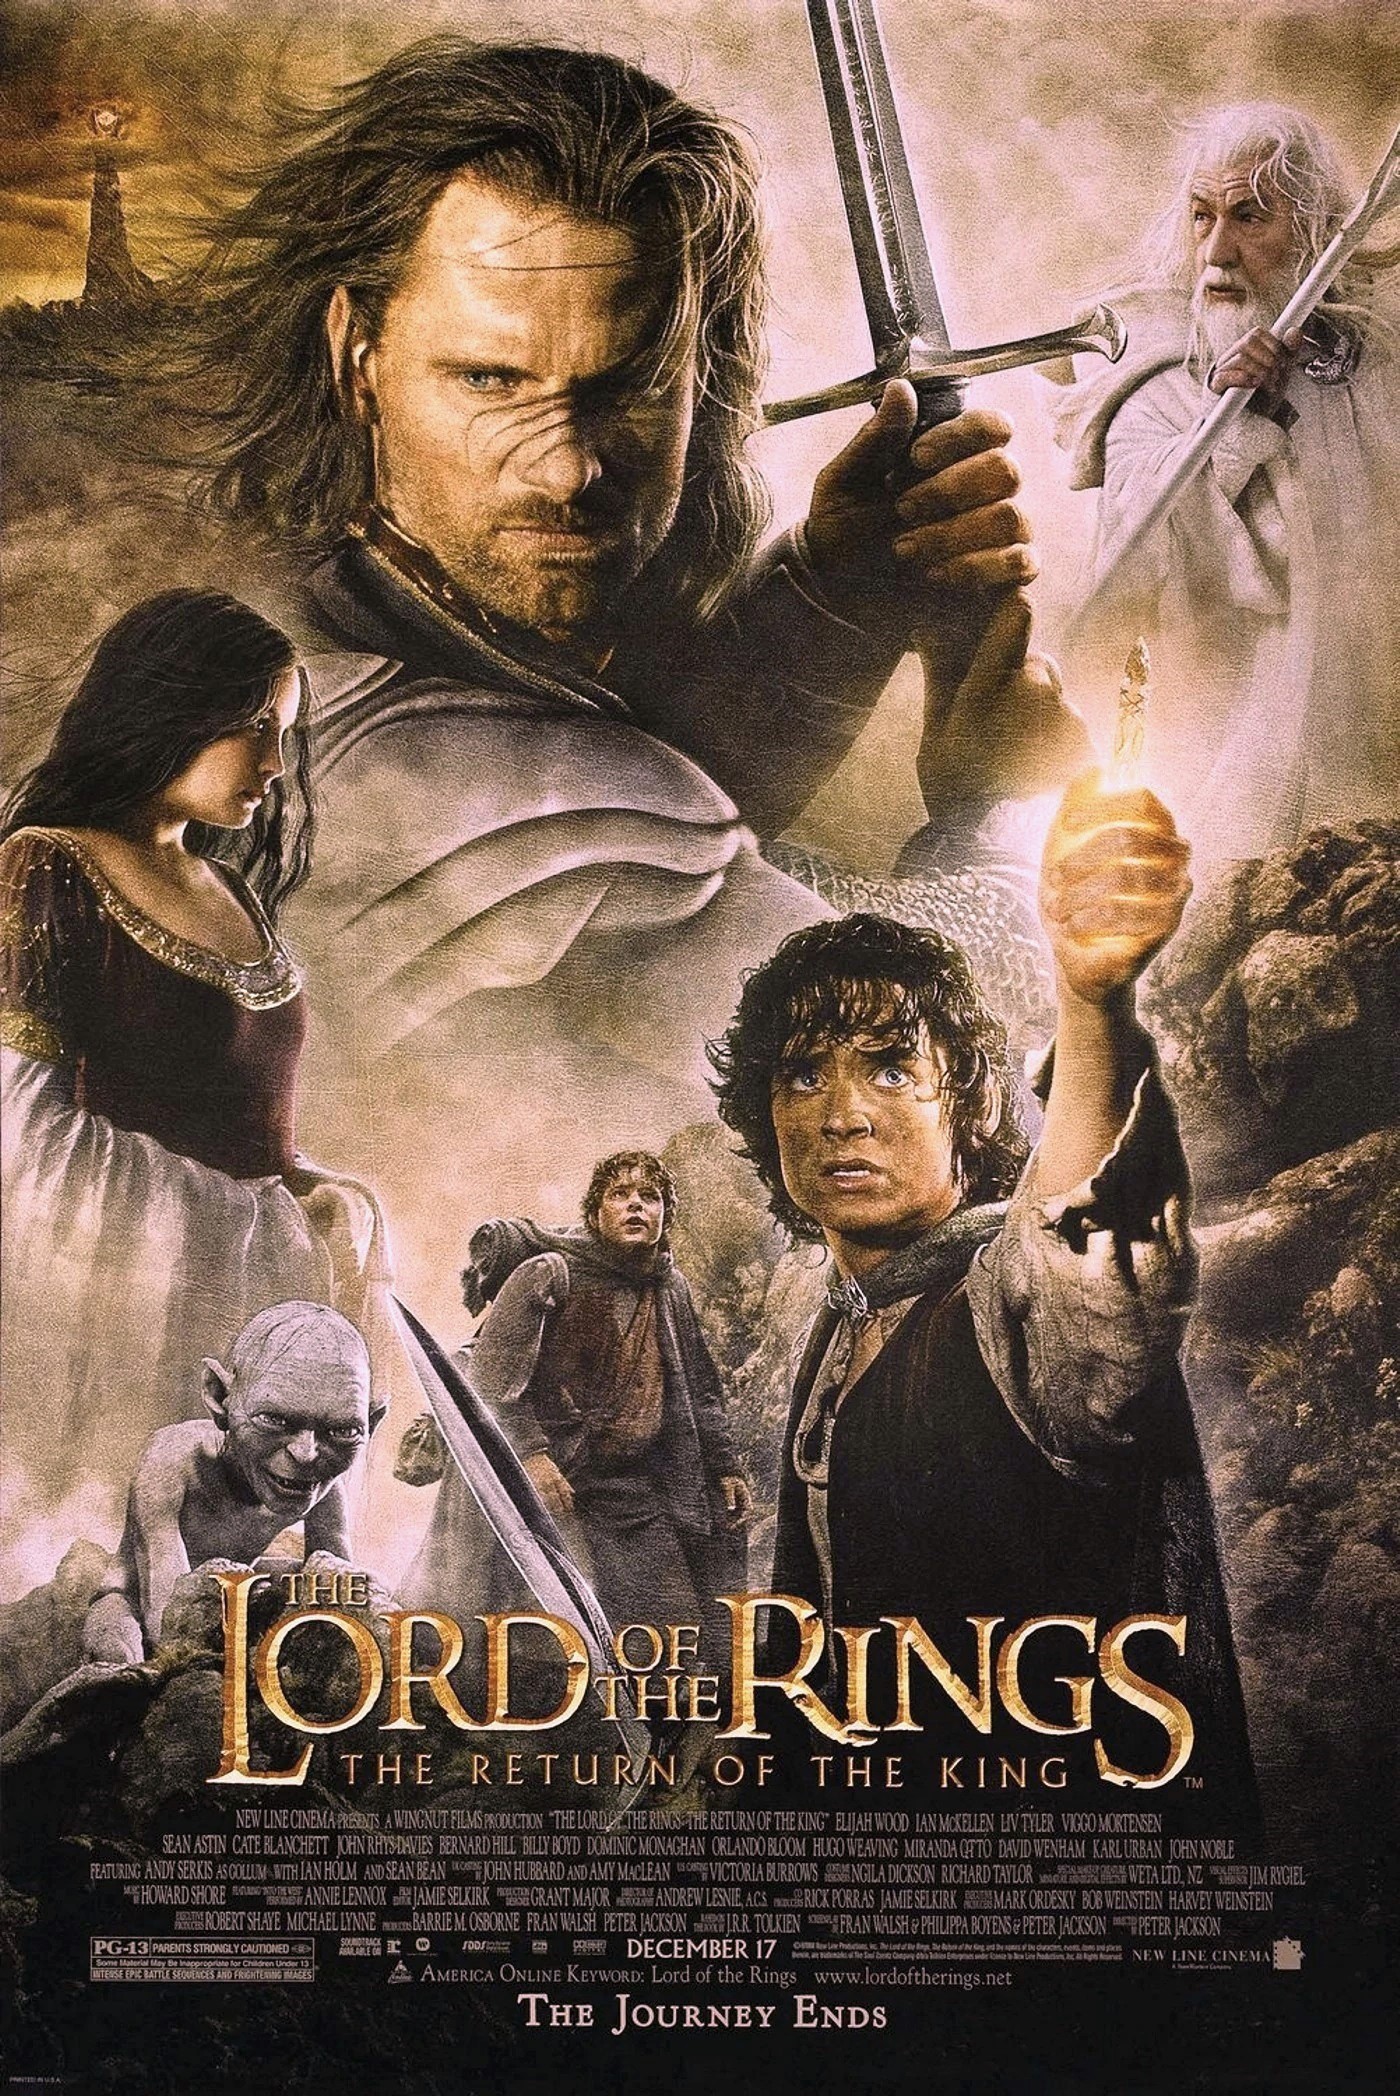 lord of the rings extended trilogy target